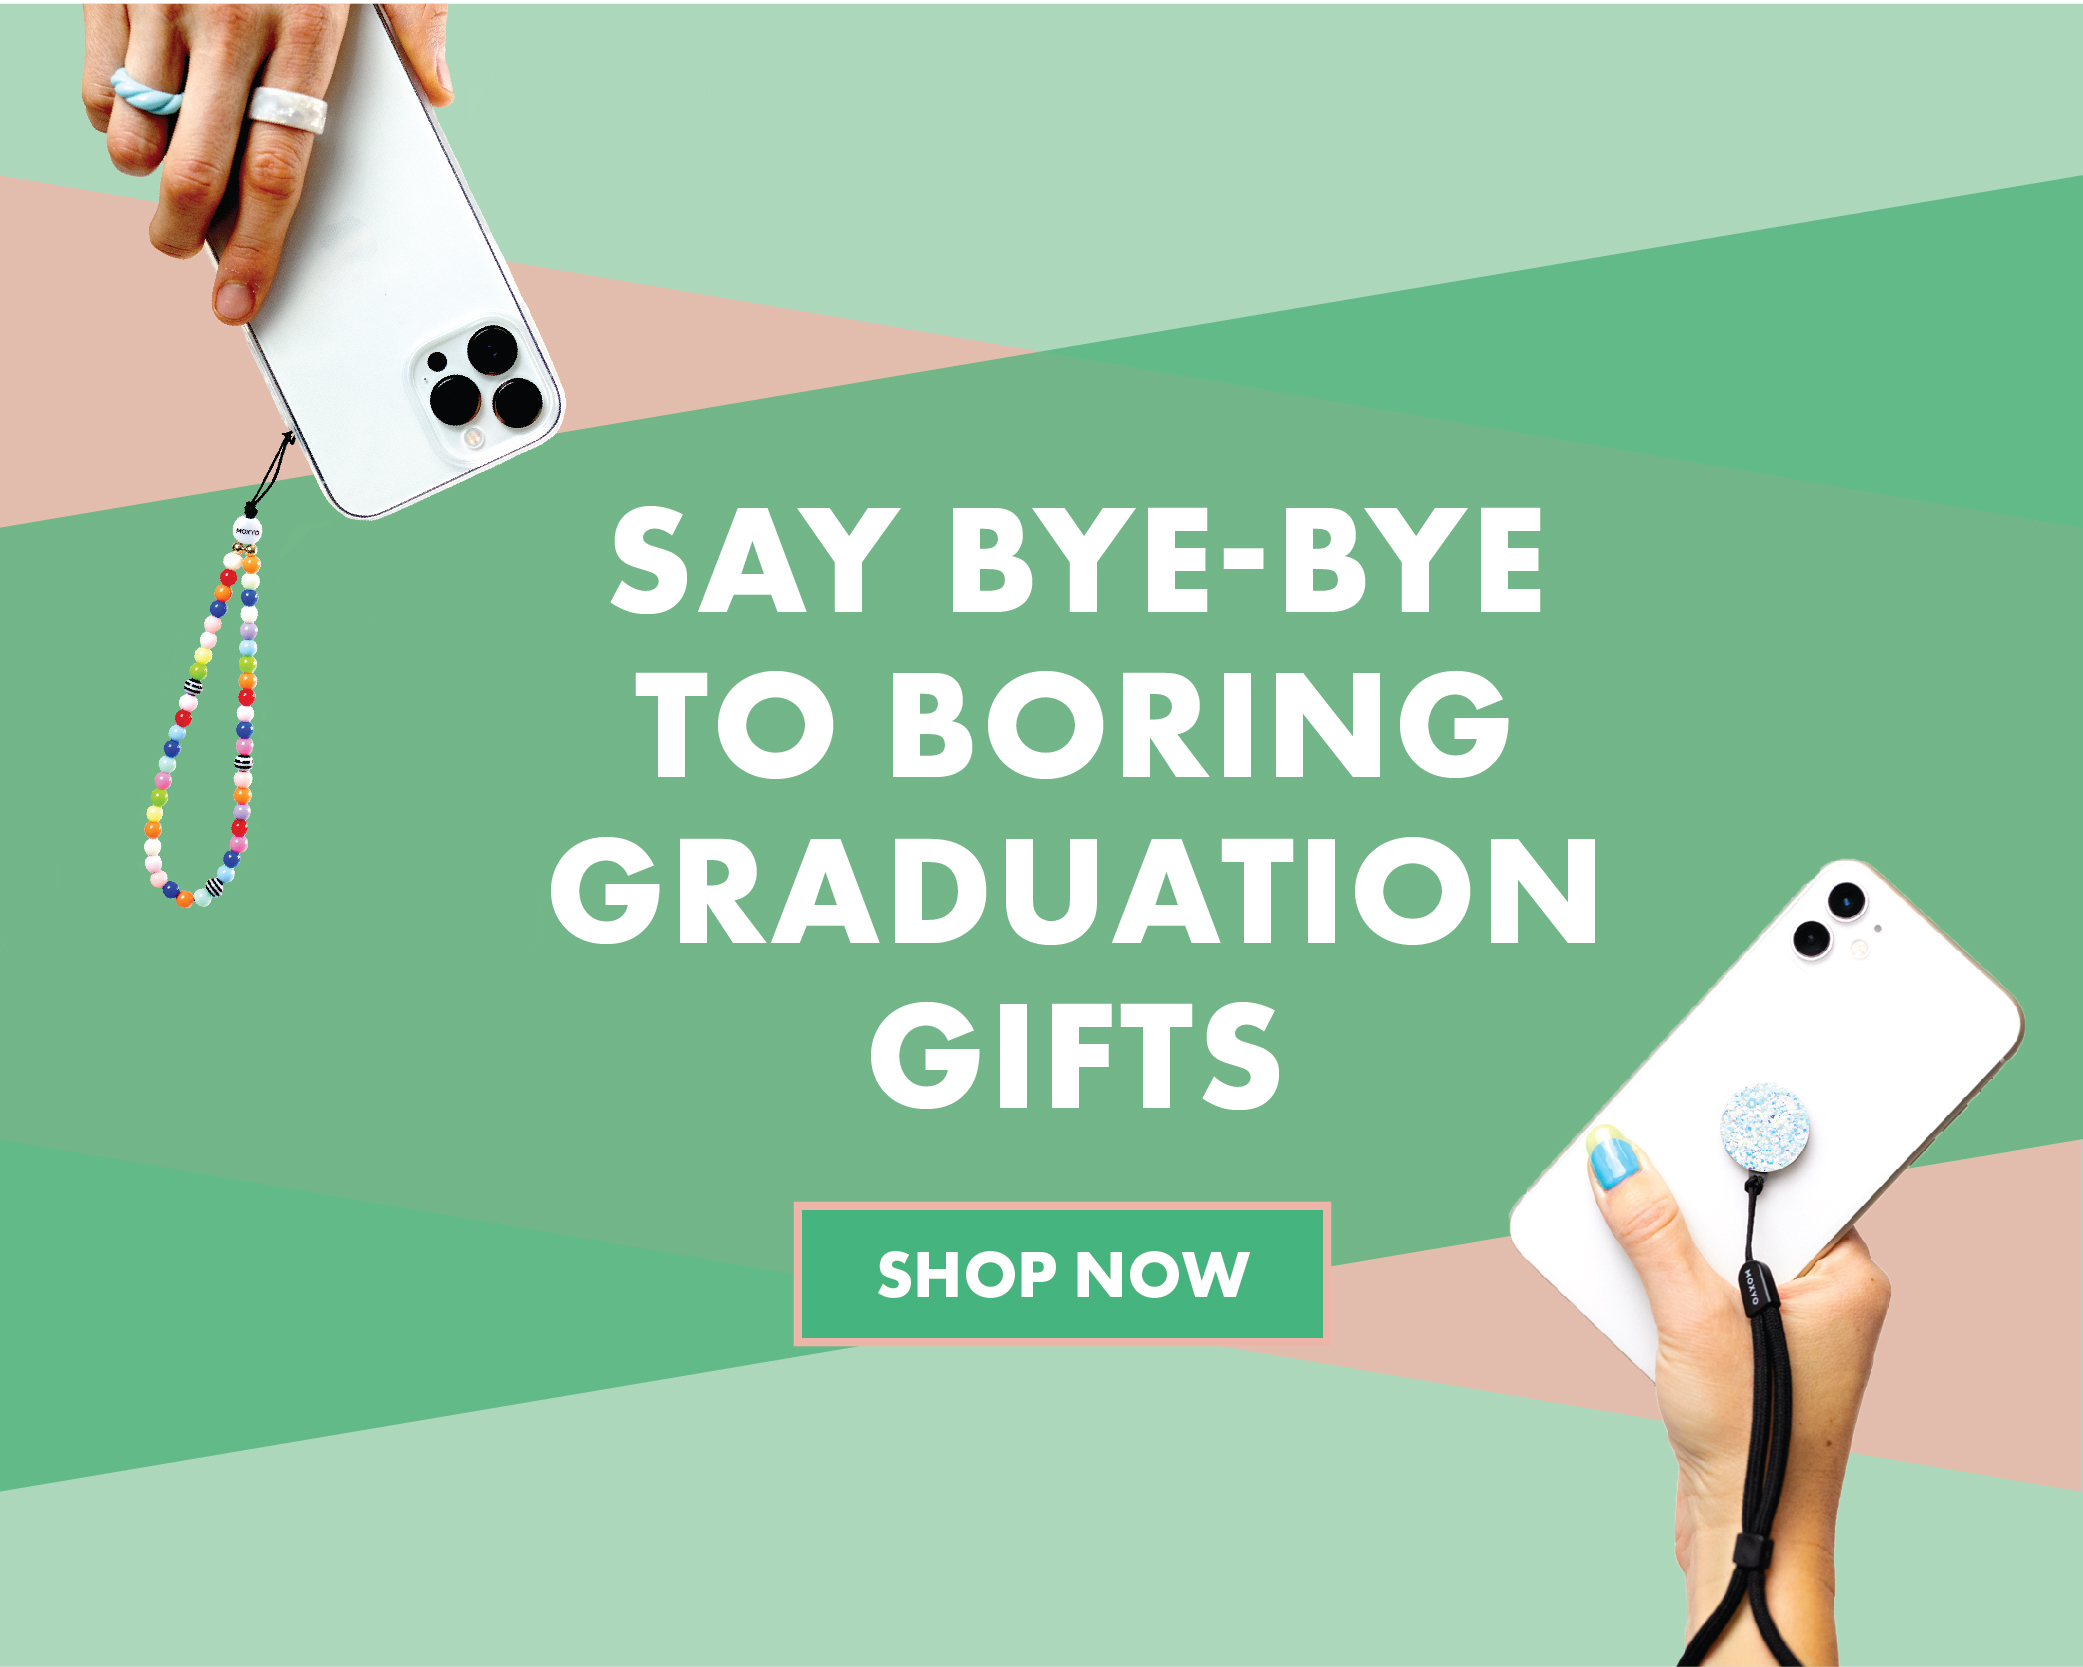 Say bye-bye to boring graduation gifts. Shop Now!